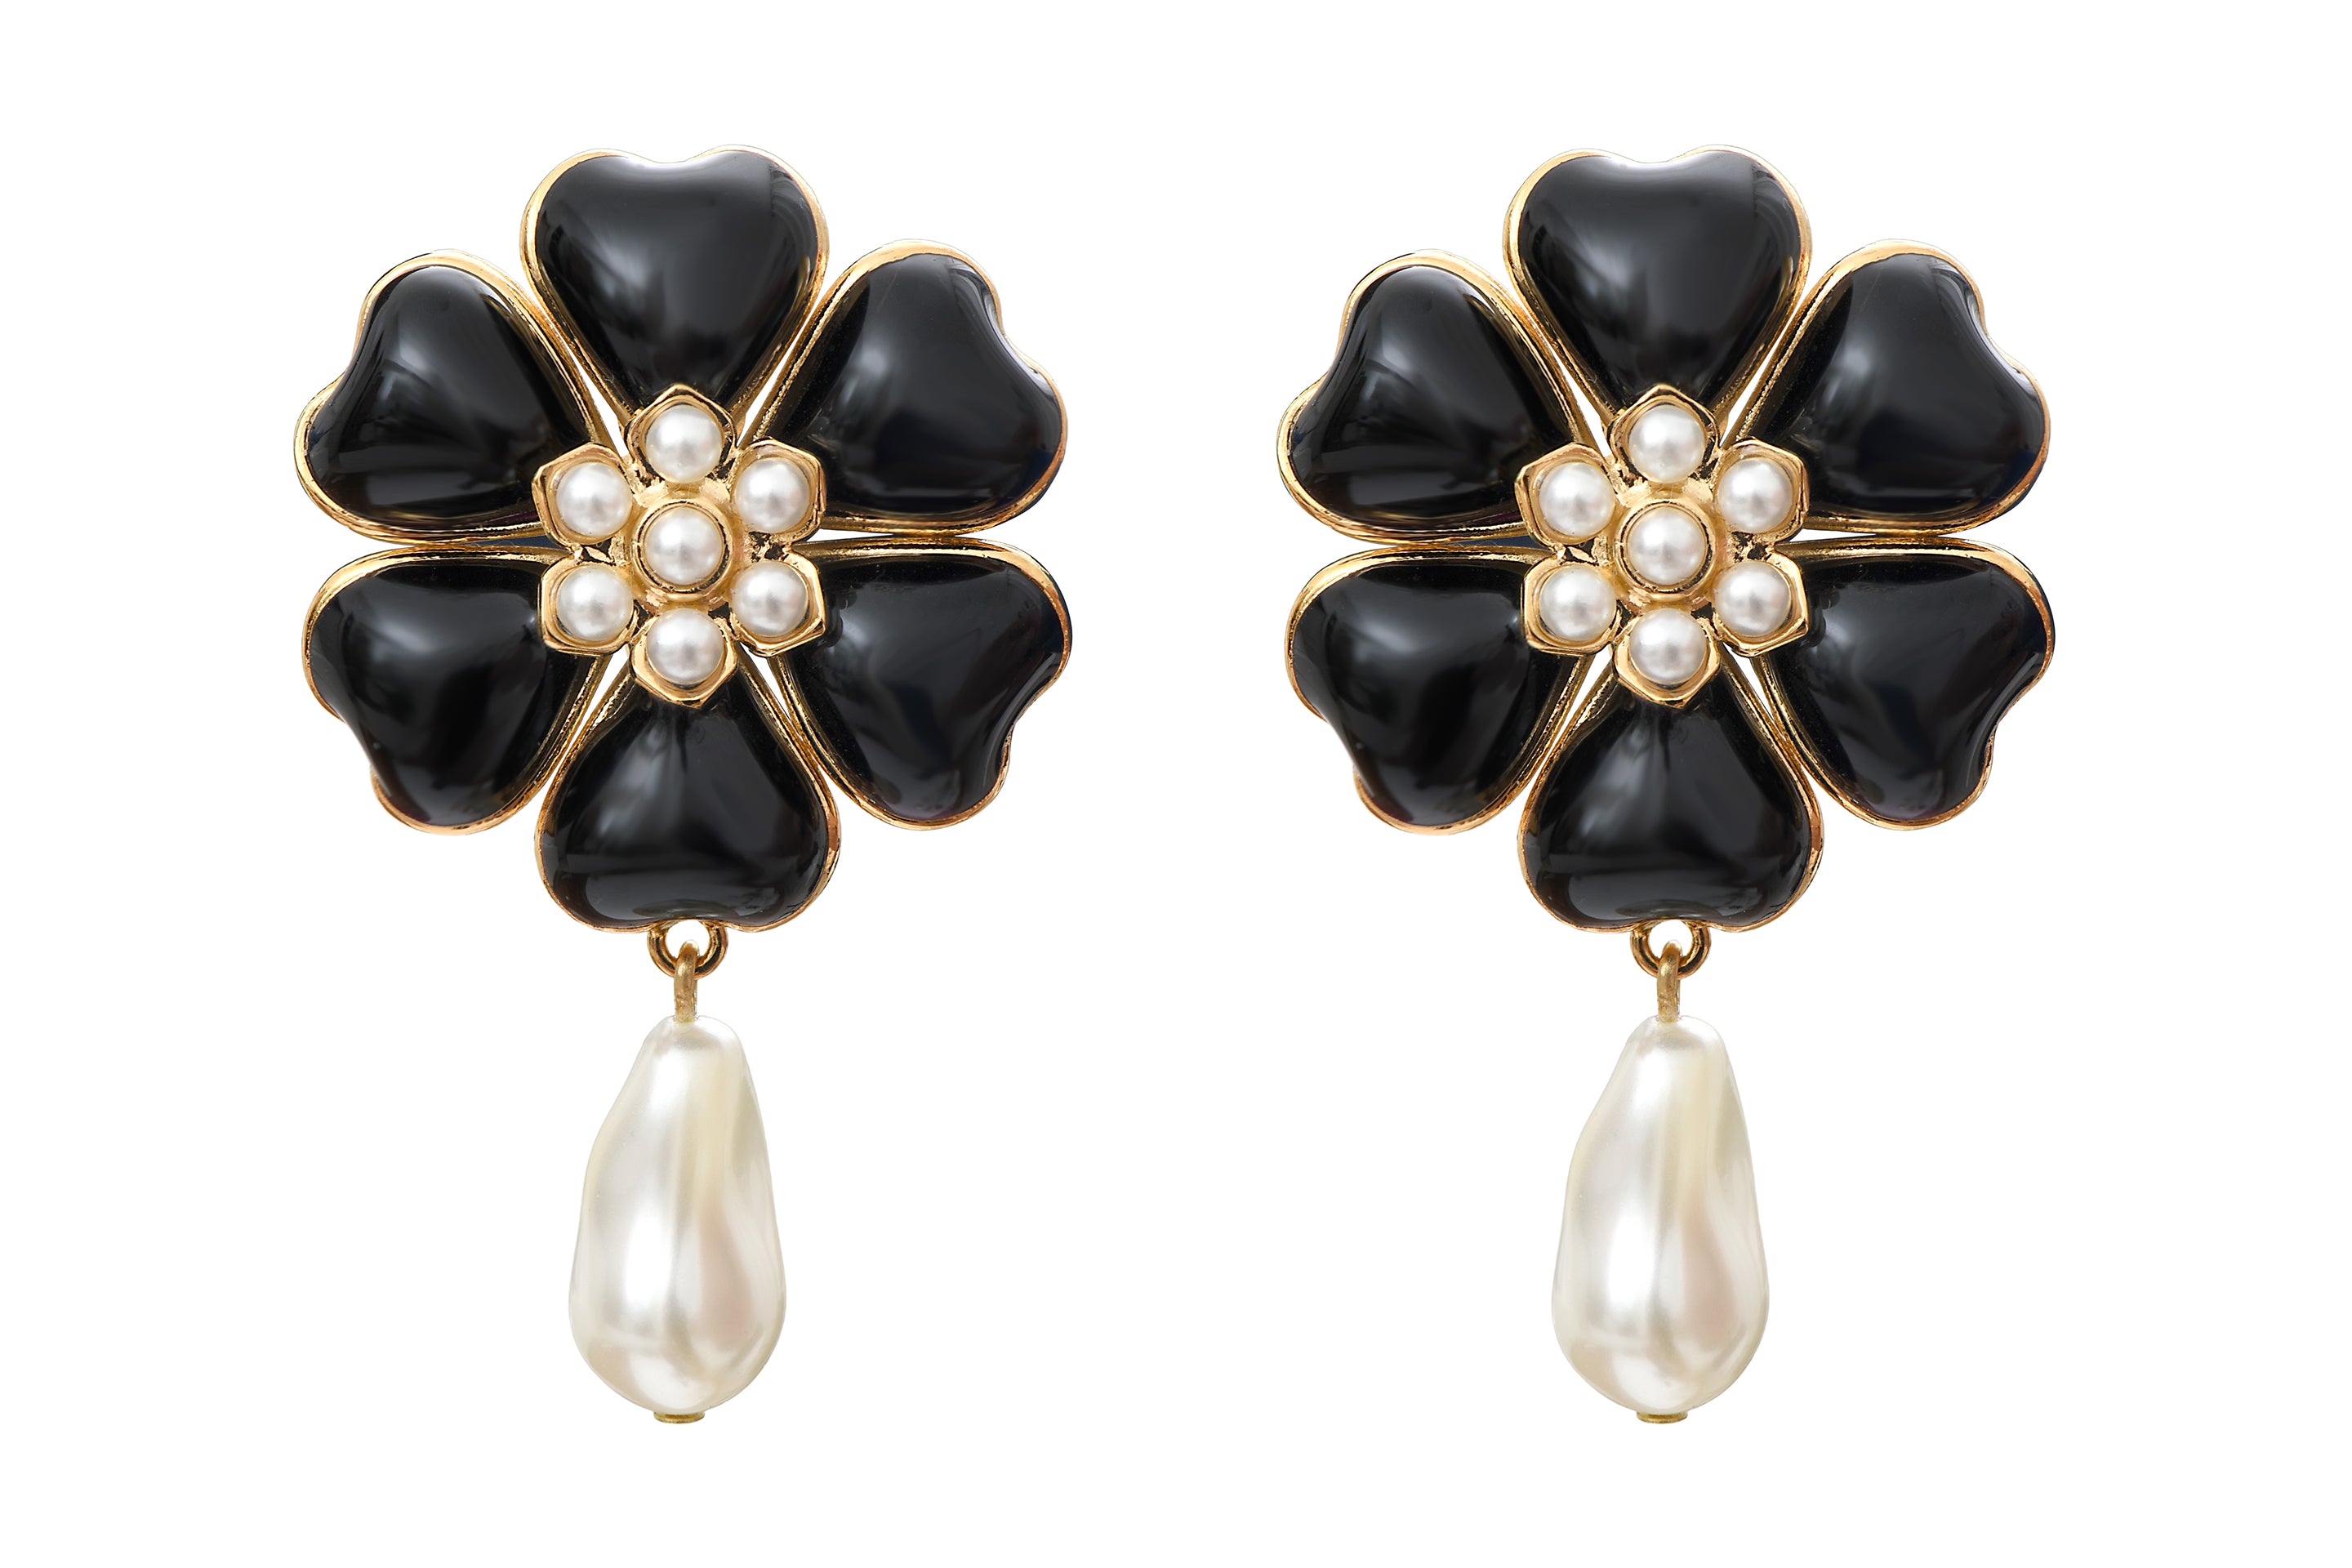 The New Classic Simple Flower Earrings